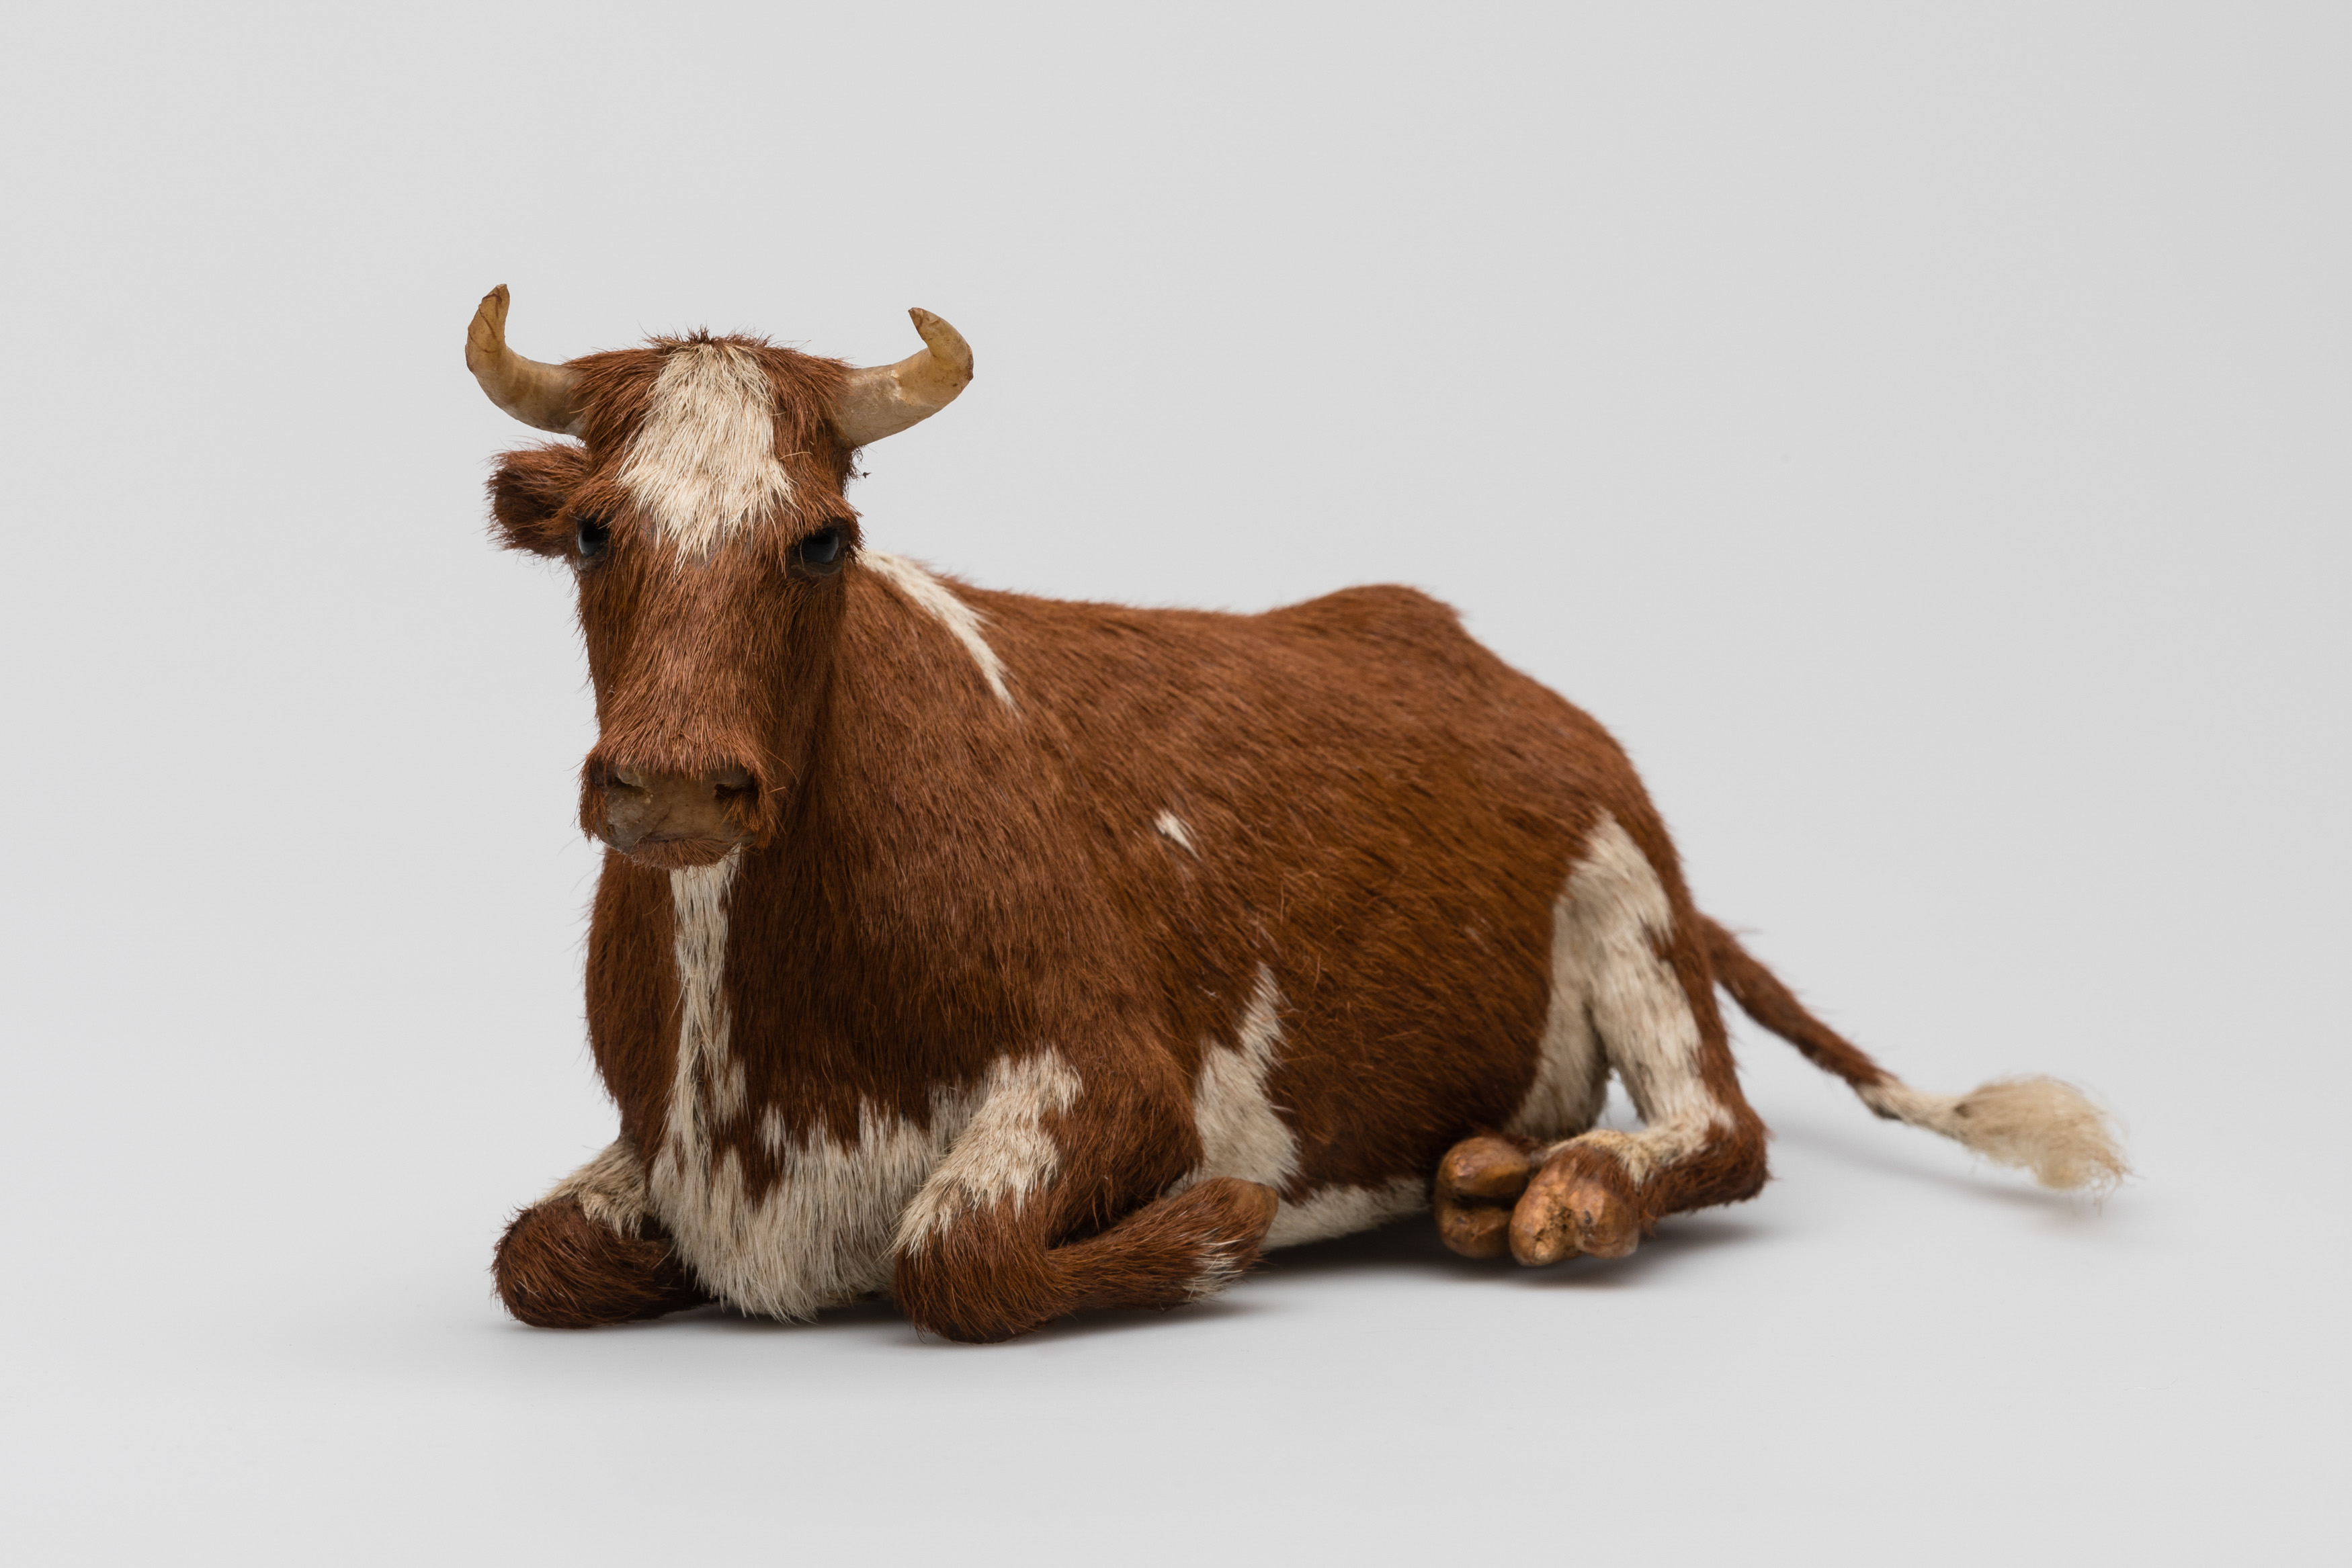 Realistic model of a cow, complete with horns and hair coat.